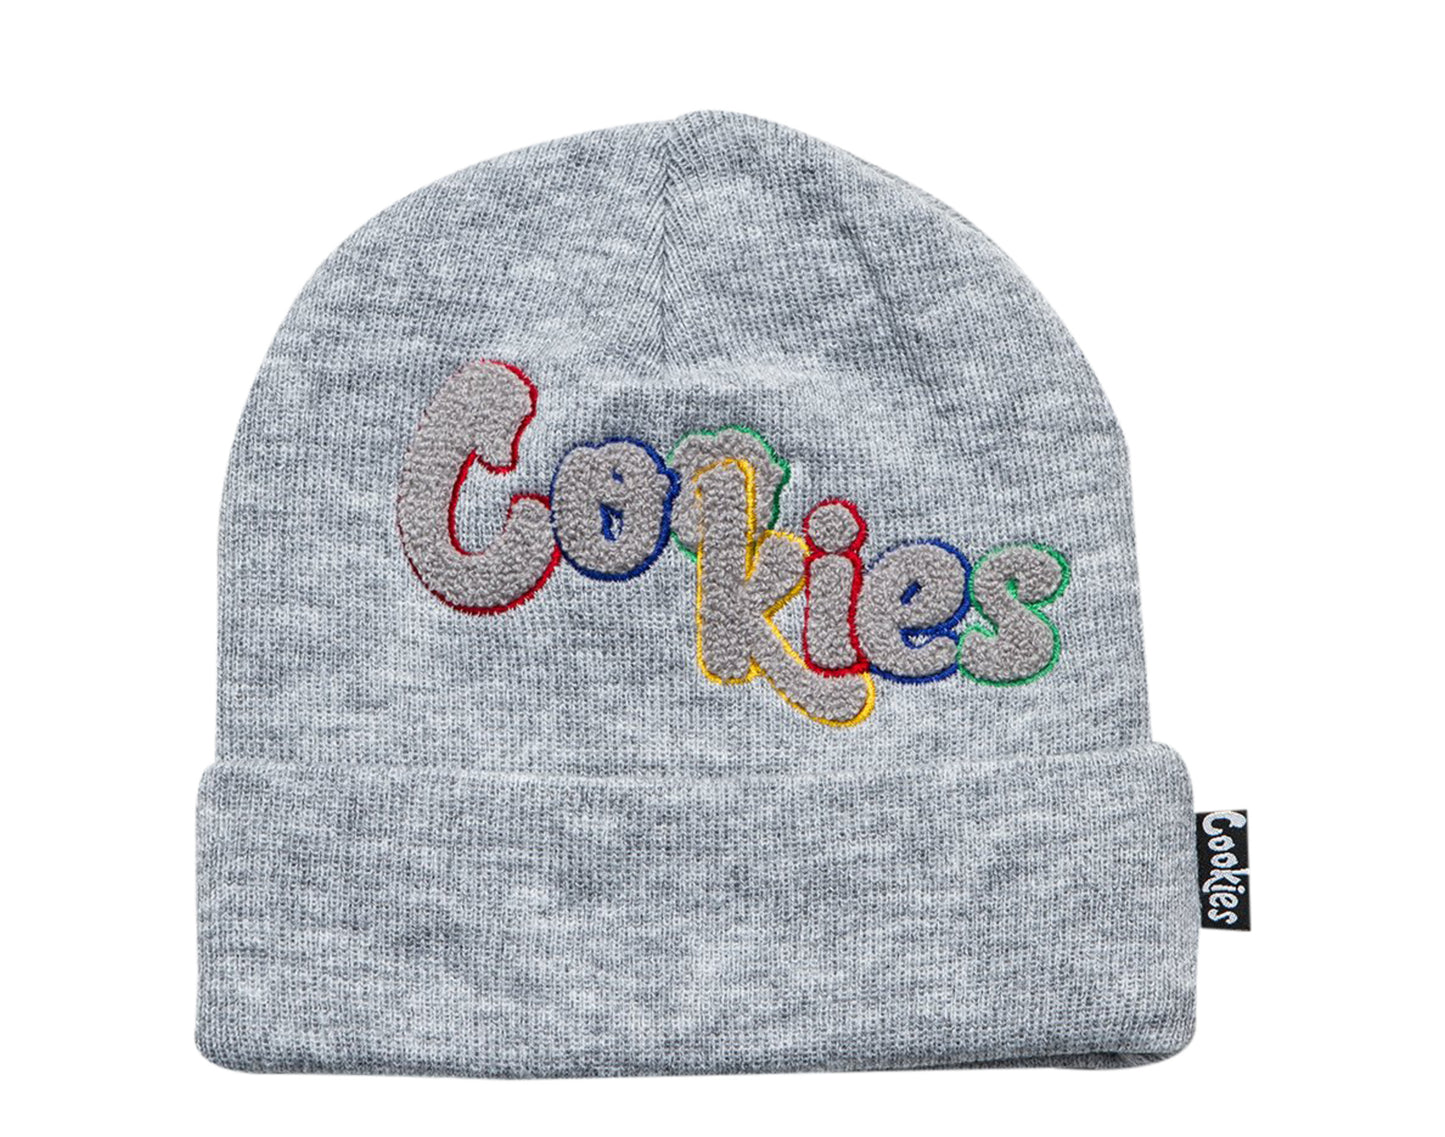 Cookies Pushin' Weight Chenille Logo Knit Beanie Grey/Multi Hat 1540X3632-HGY